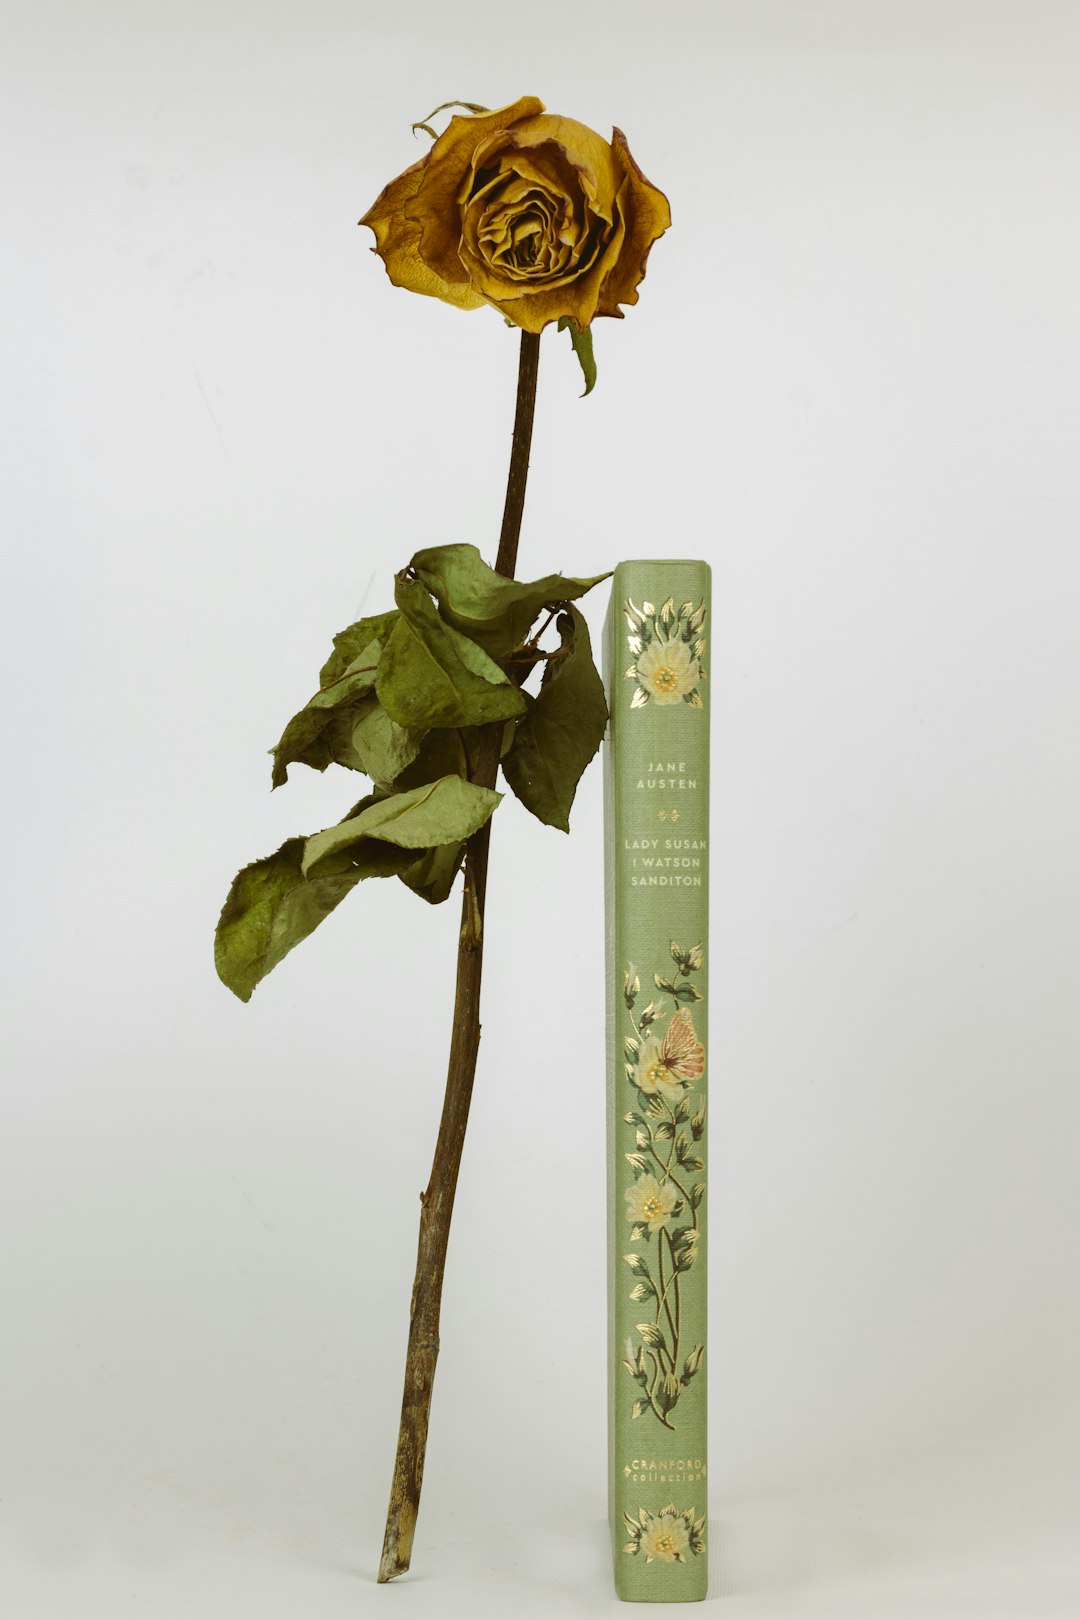 yellow rose in bloom on white wooden post